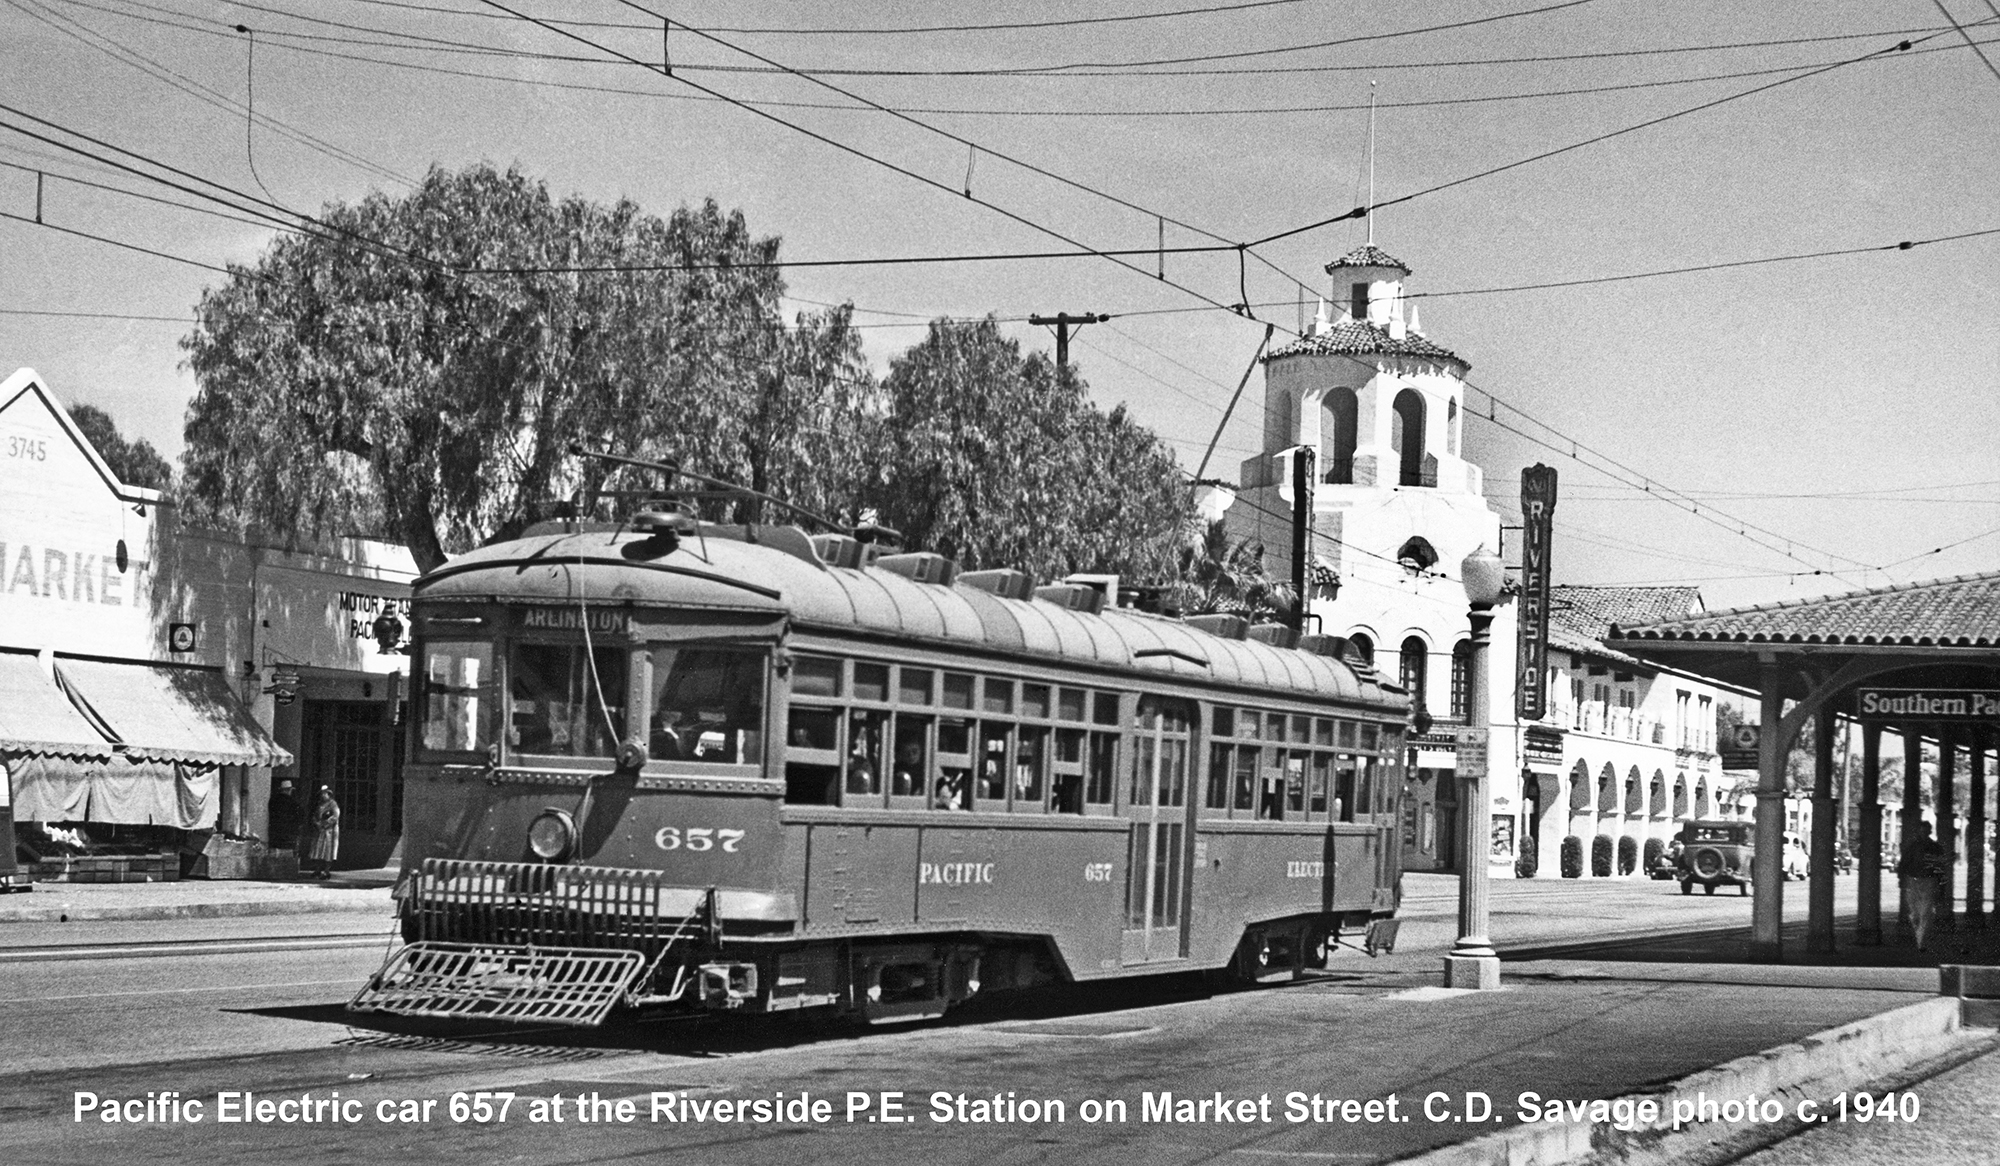 PE 657 makes a stop at the Riverside Station on Market Street just south of the intersection with Mission Inn Avenue before continuing south on Market Street and on to Arlington. Charles D. Savage photo, c. 1940., Donald Duke collection, PERhys.org.